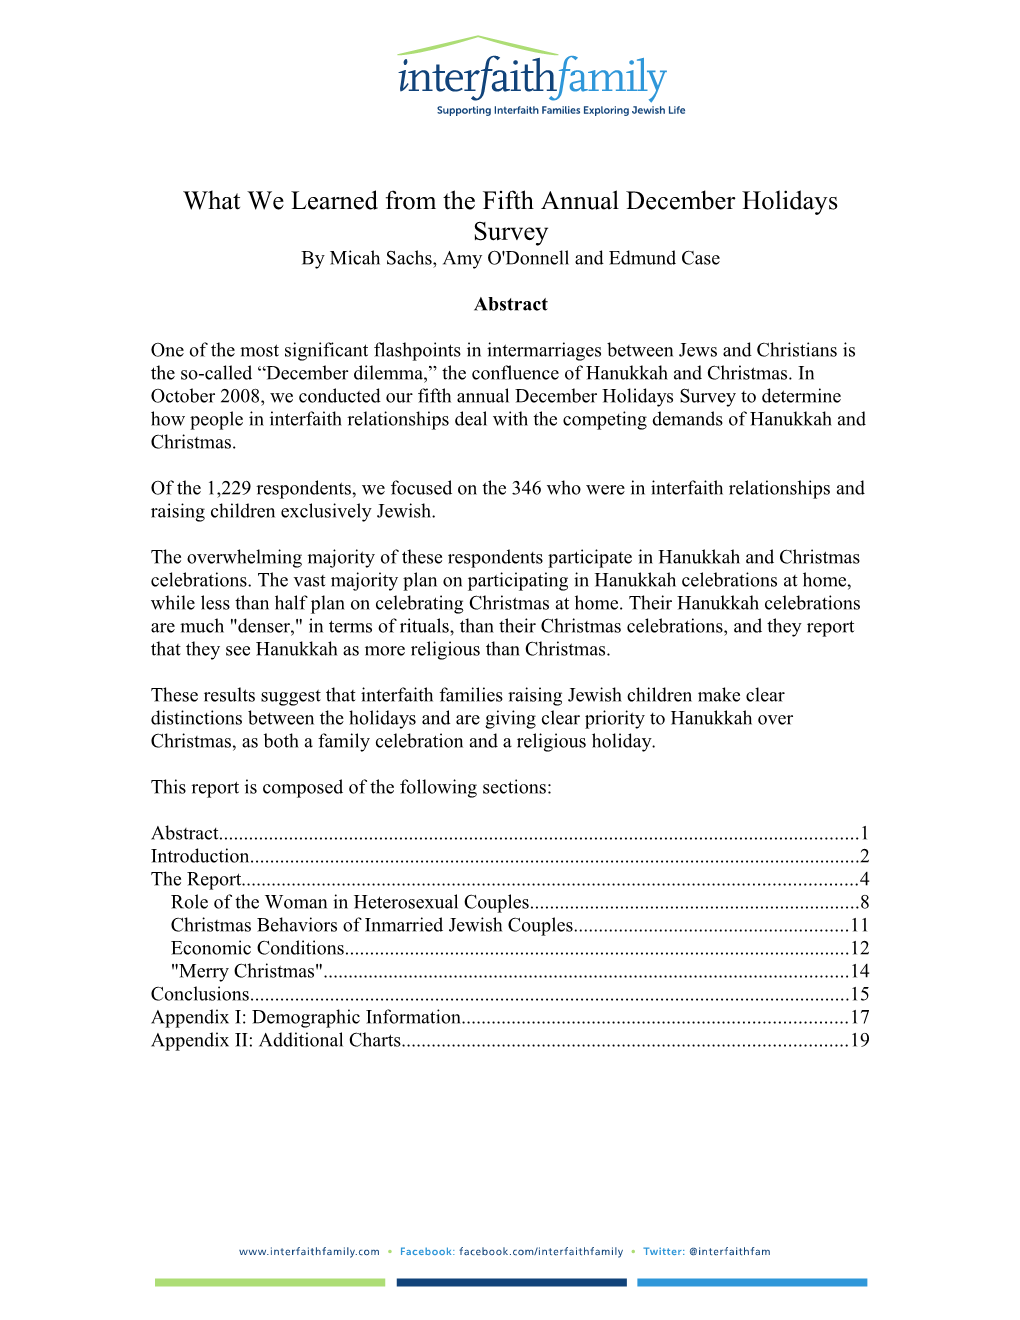 What We Learned from the 2007 December Holidays Survey